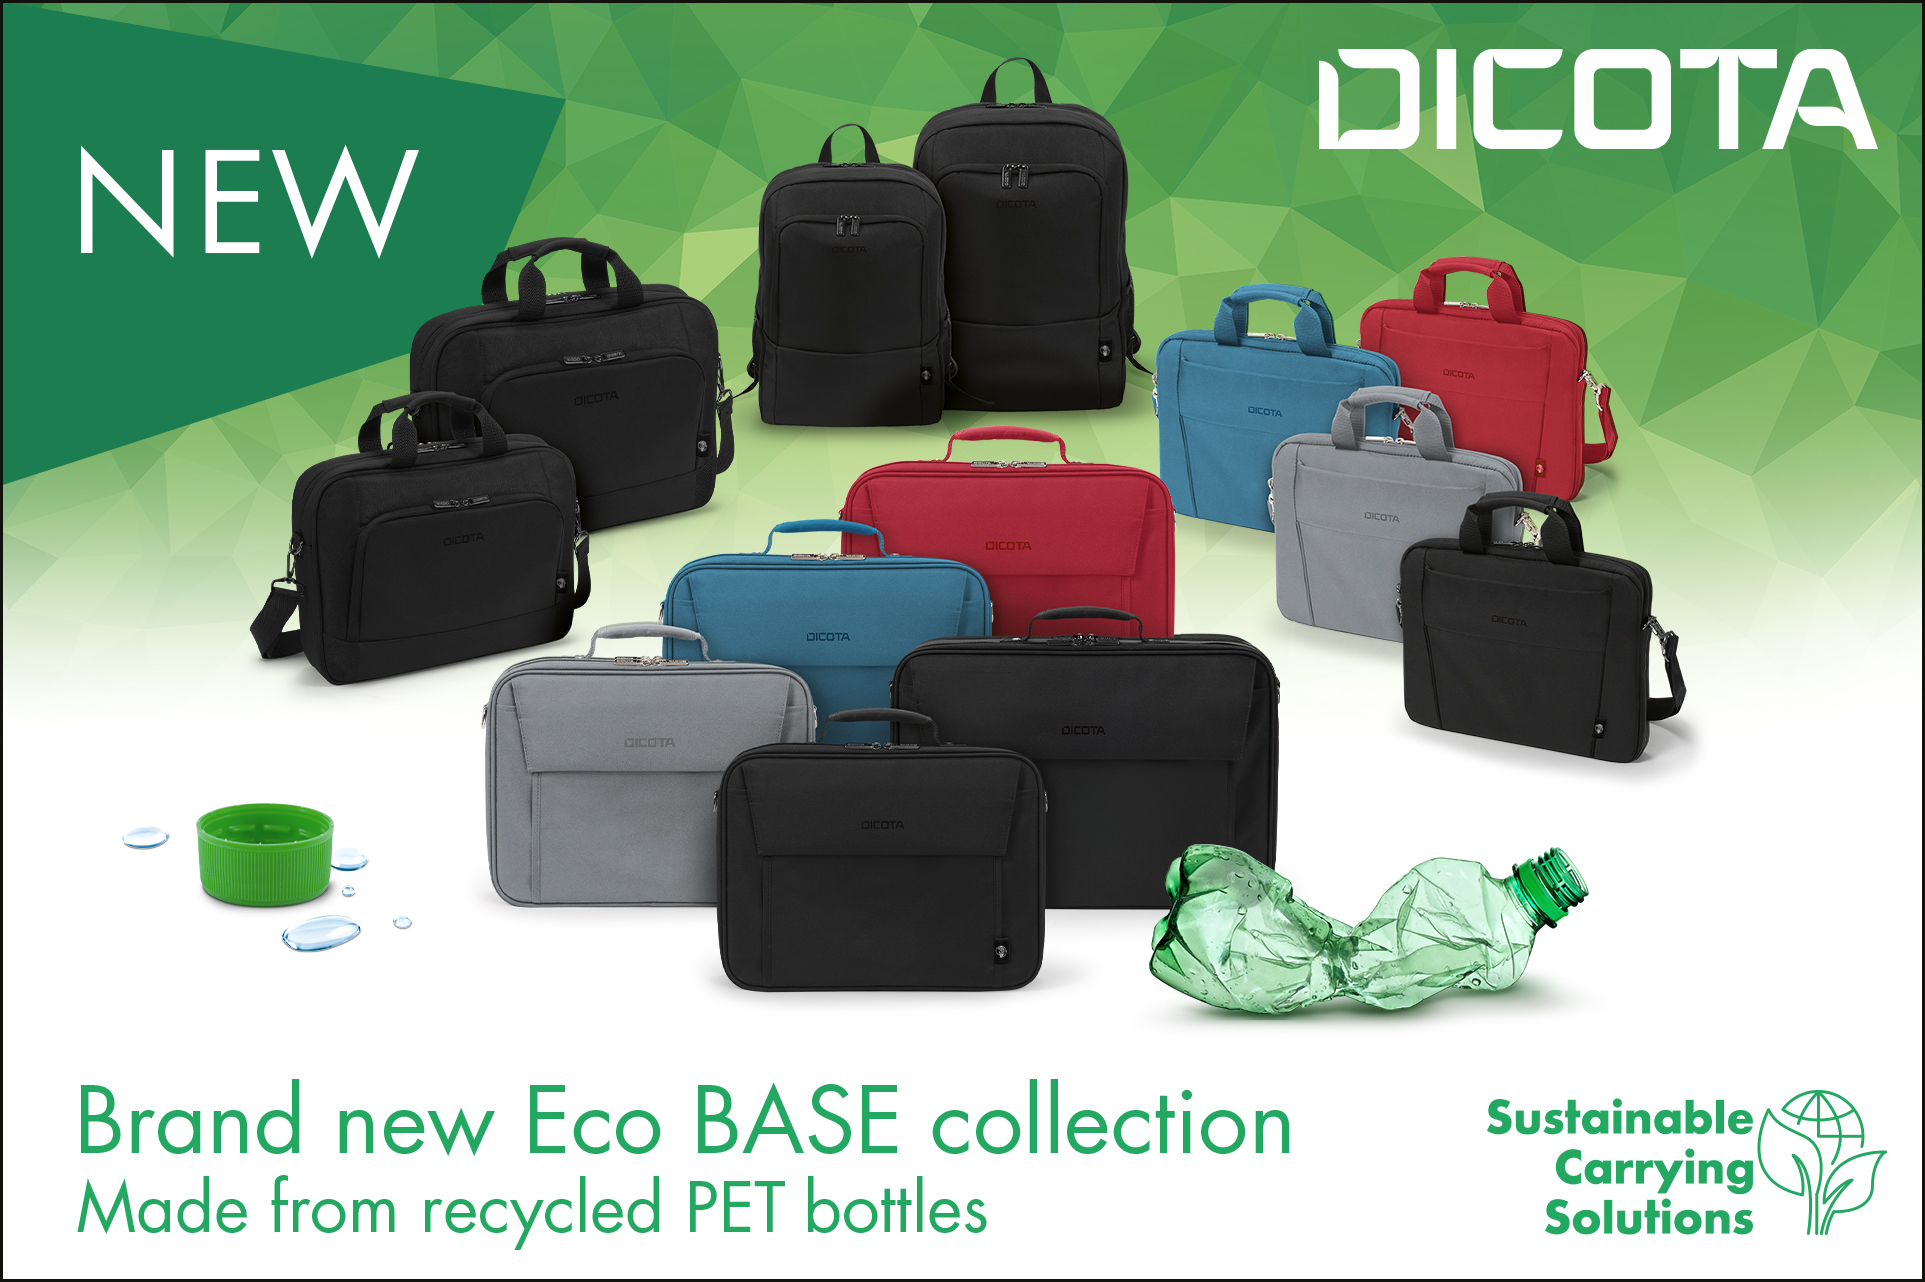 Discover the new Eco BASE collection